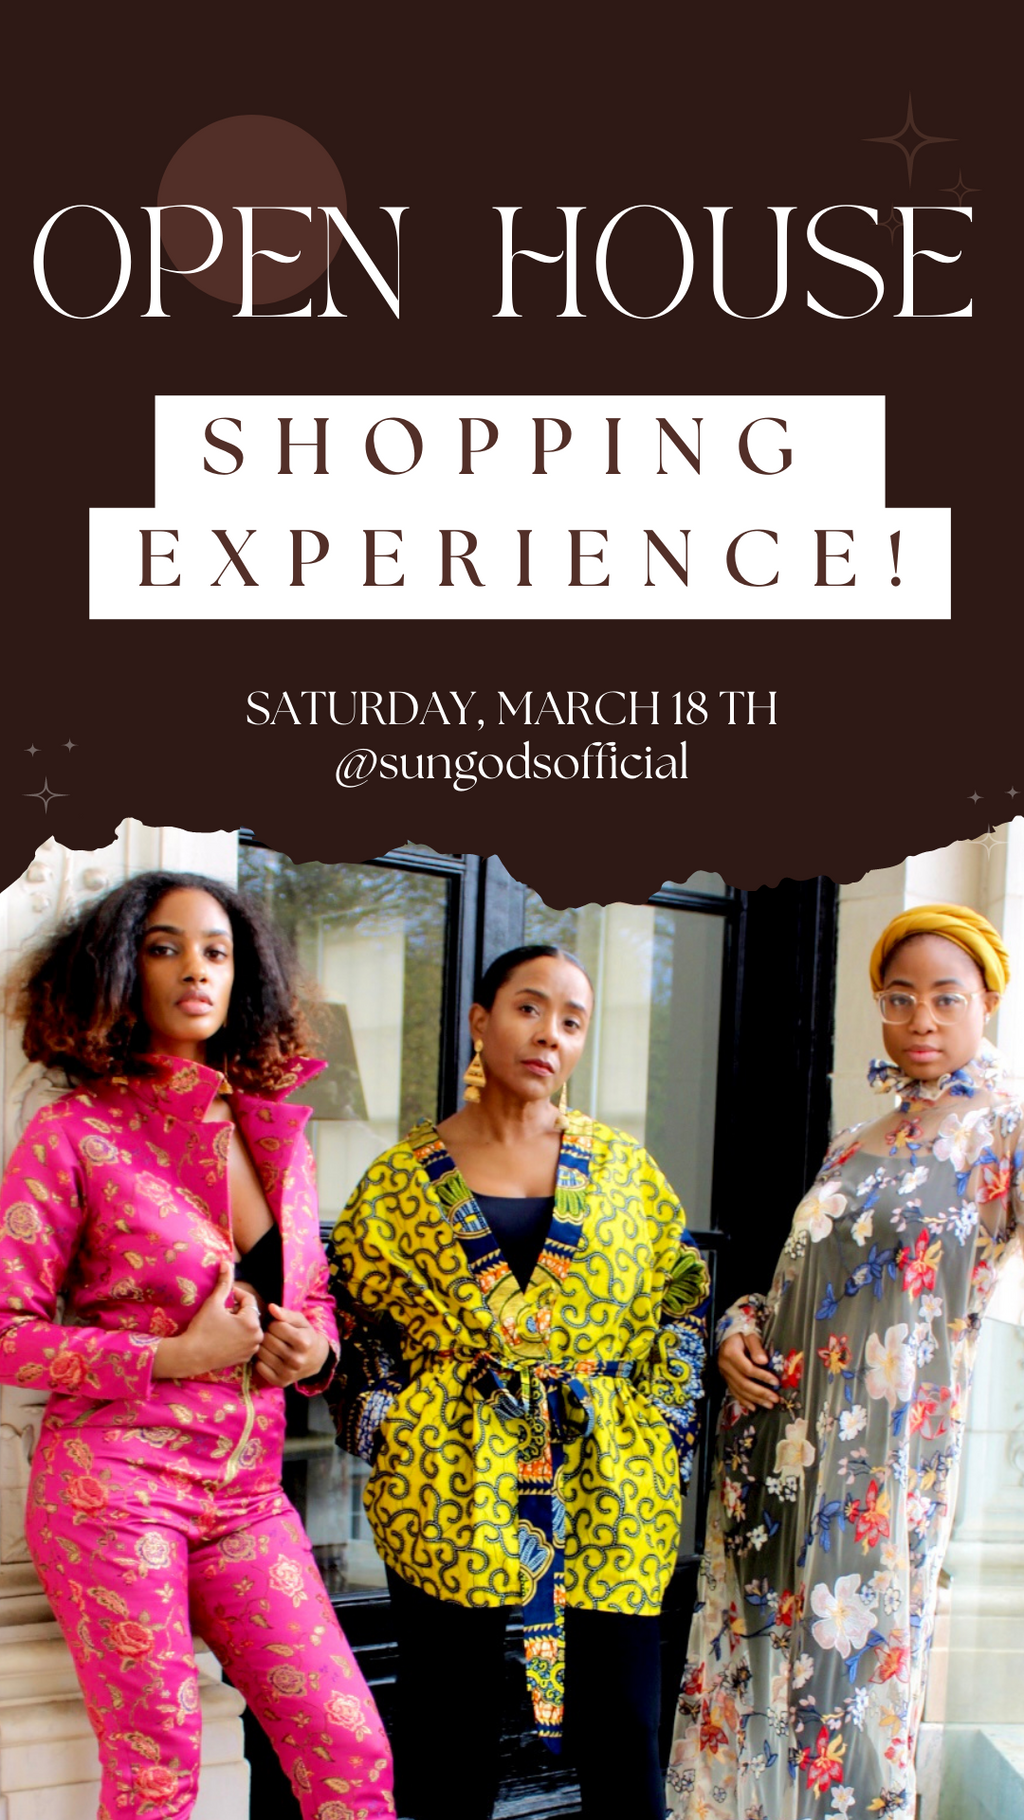 Open House Shopping Experience!